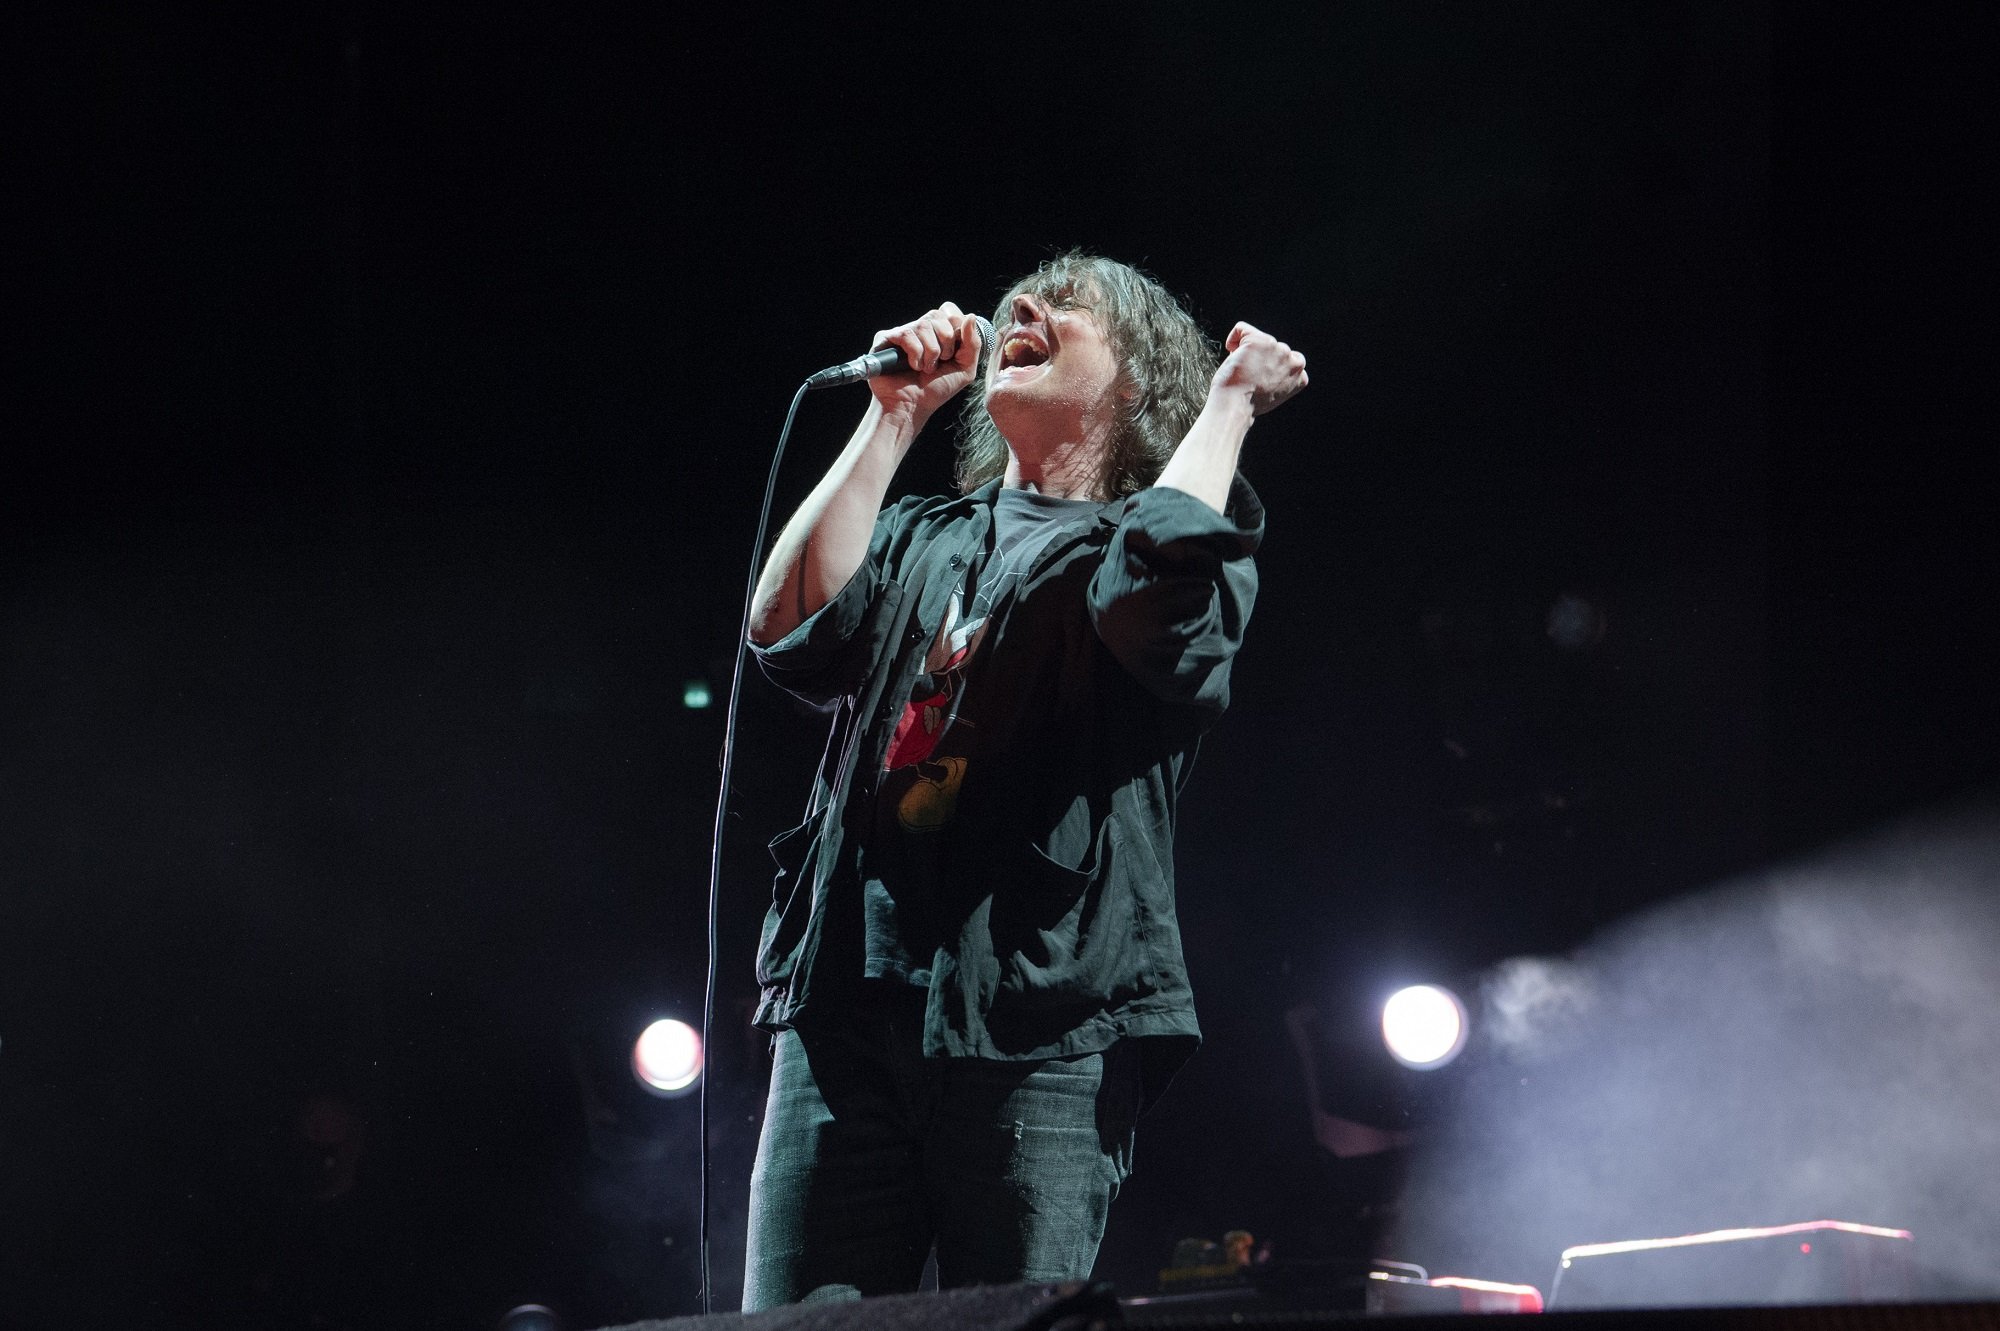 Gerard Way of My Chemical Romance performs onstage in Paris, France